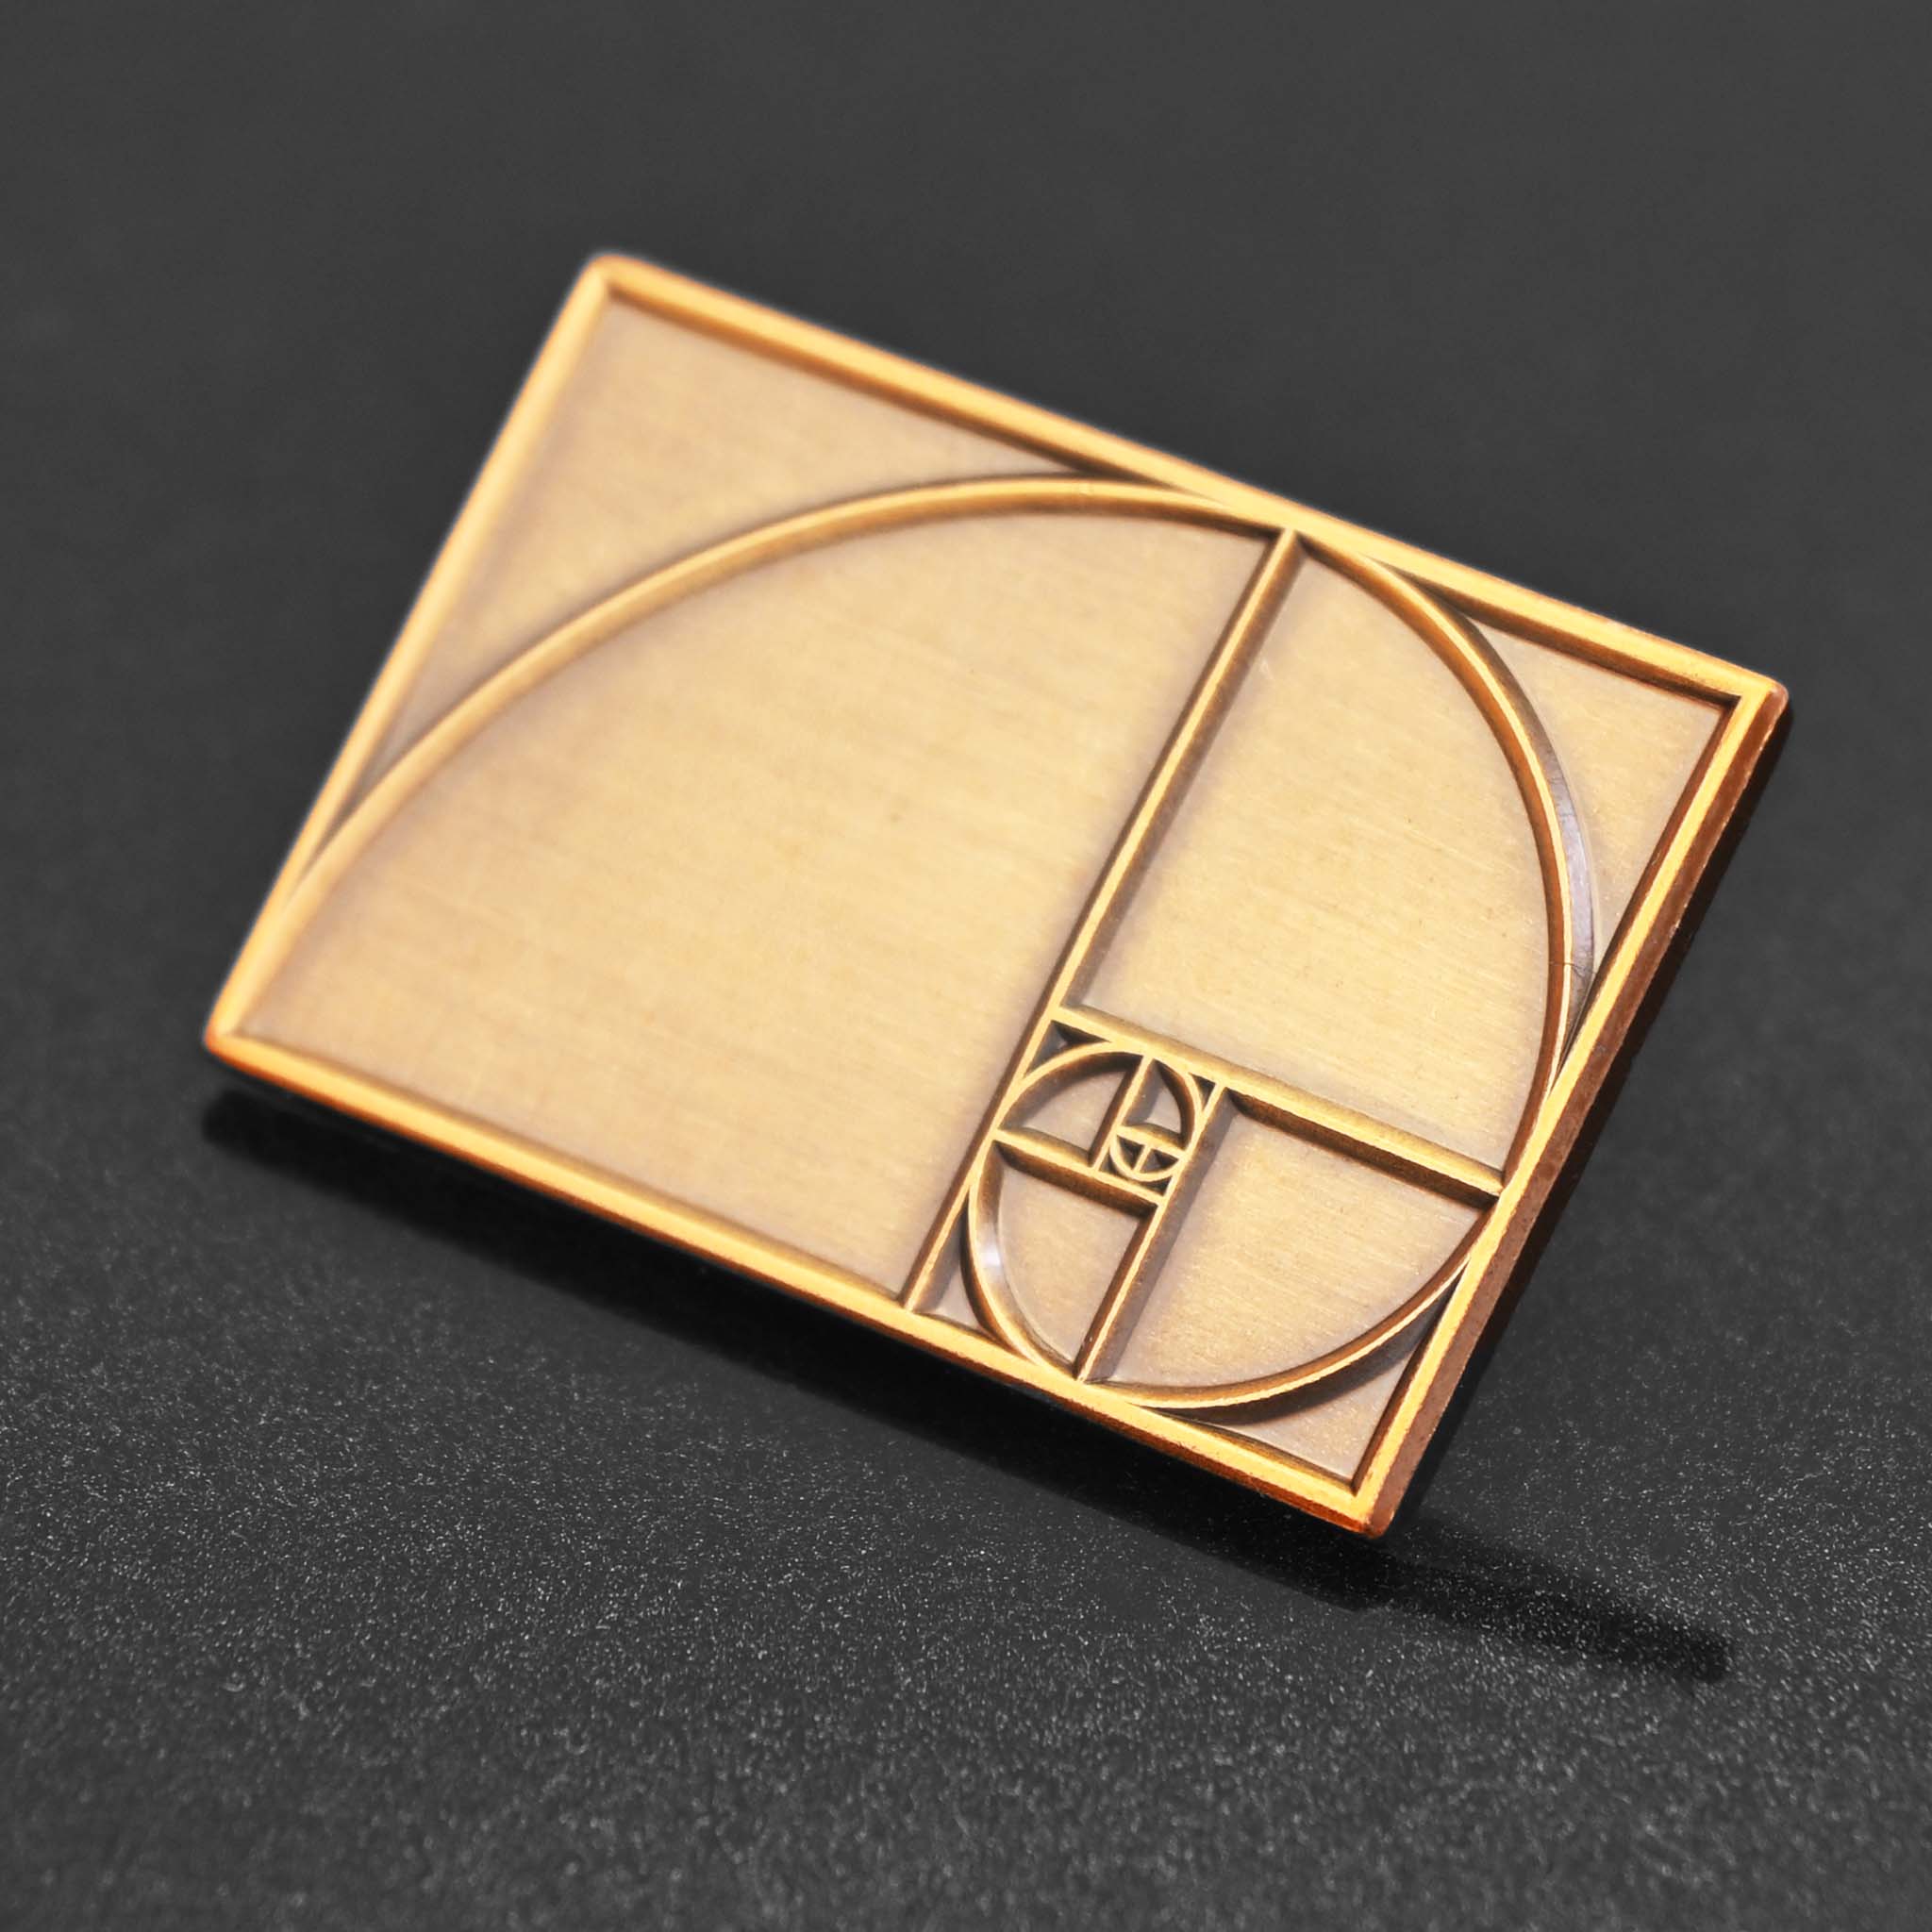 An antique brass enamel pin featuring the Golden Ratio - perfect for designers and artists